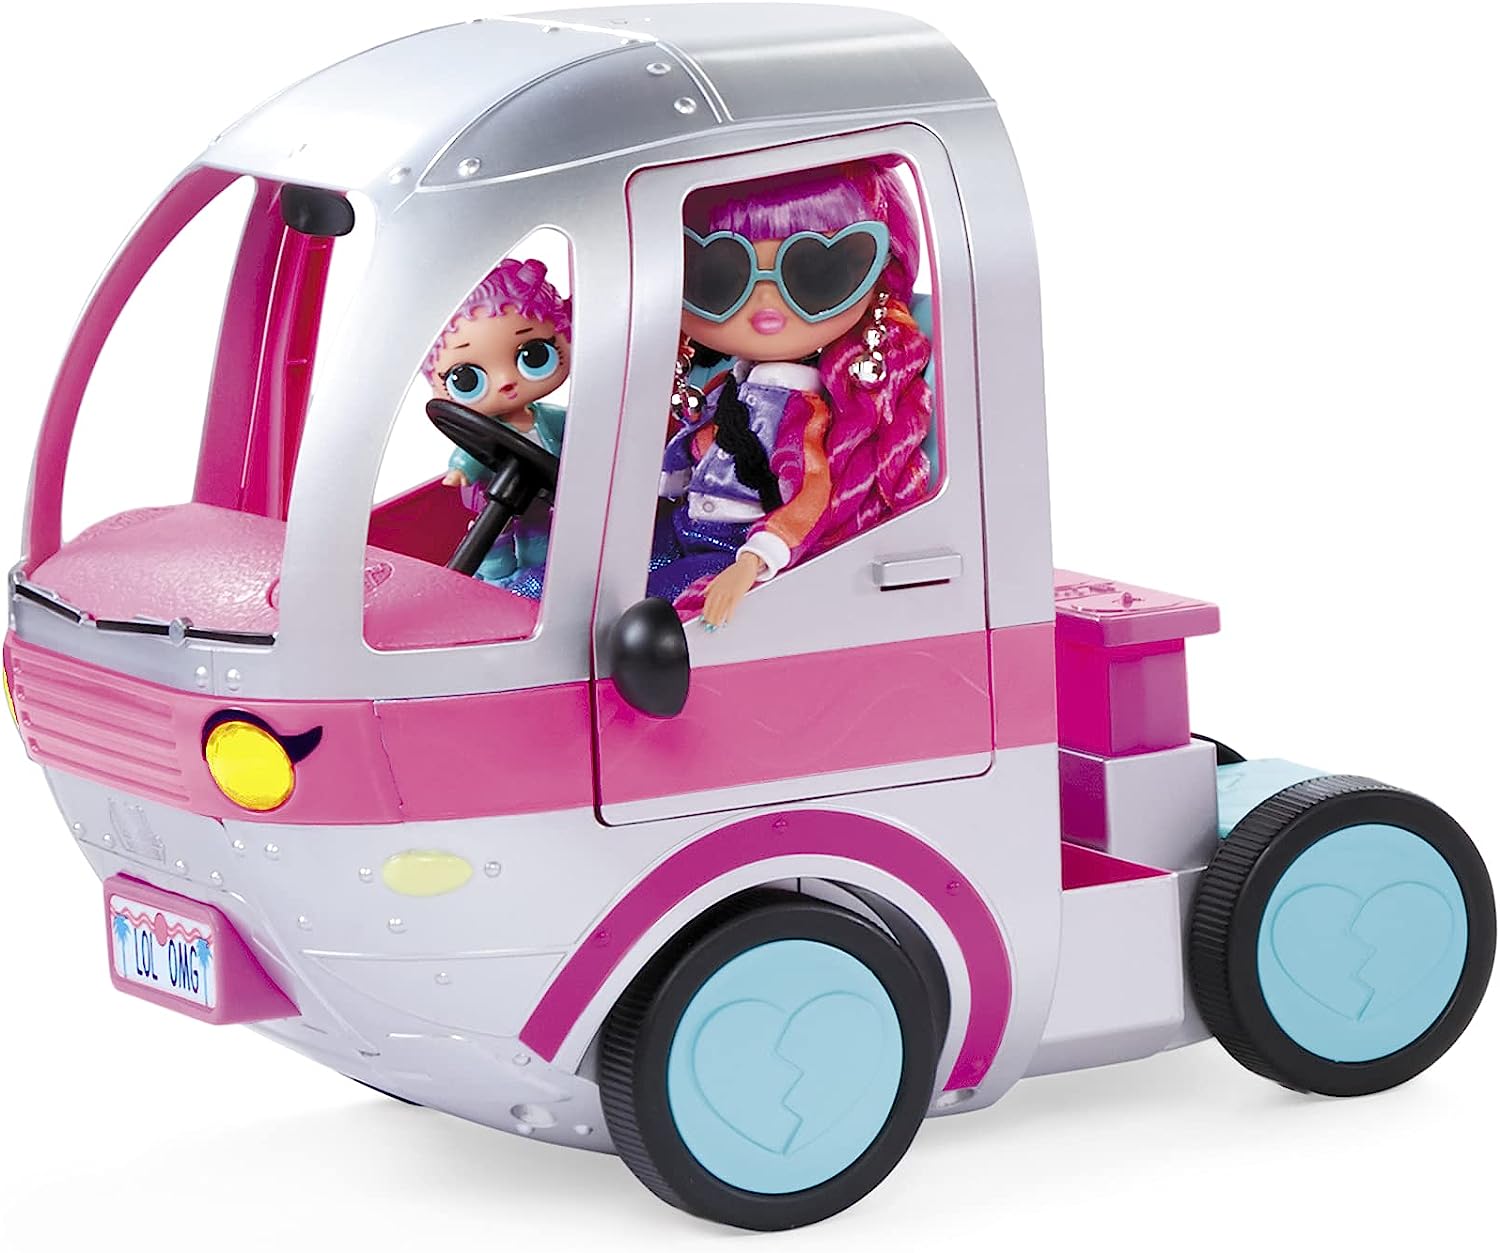 🍒 LOL Surprise OMG Glamper Fashion Camper Doll Playset for Kids➔  **Instructions & Review** 